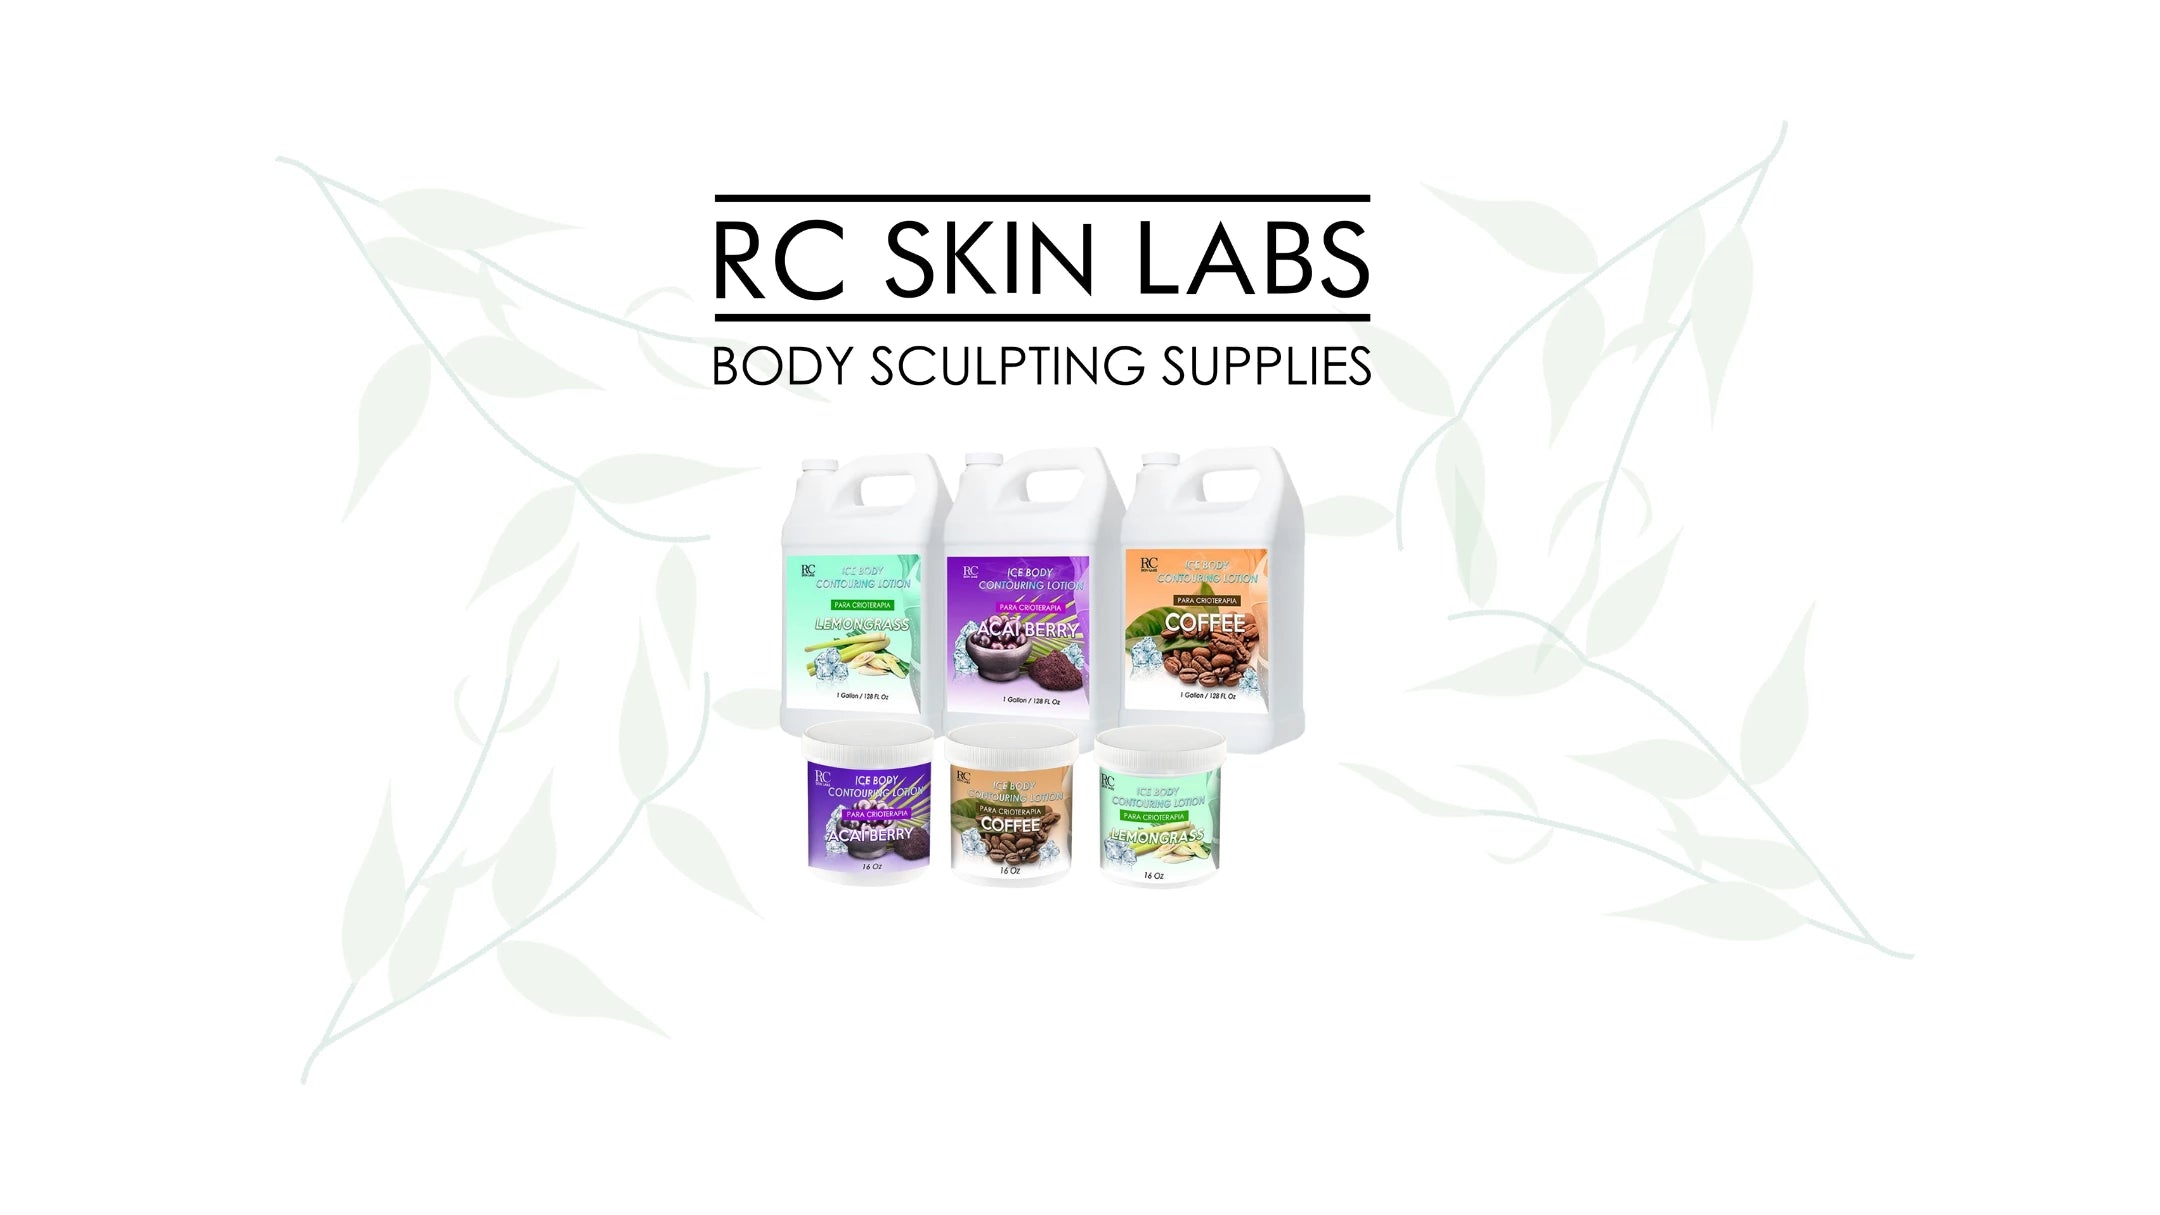 Ice Body Sculpting – Rc Skin Labs Pro